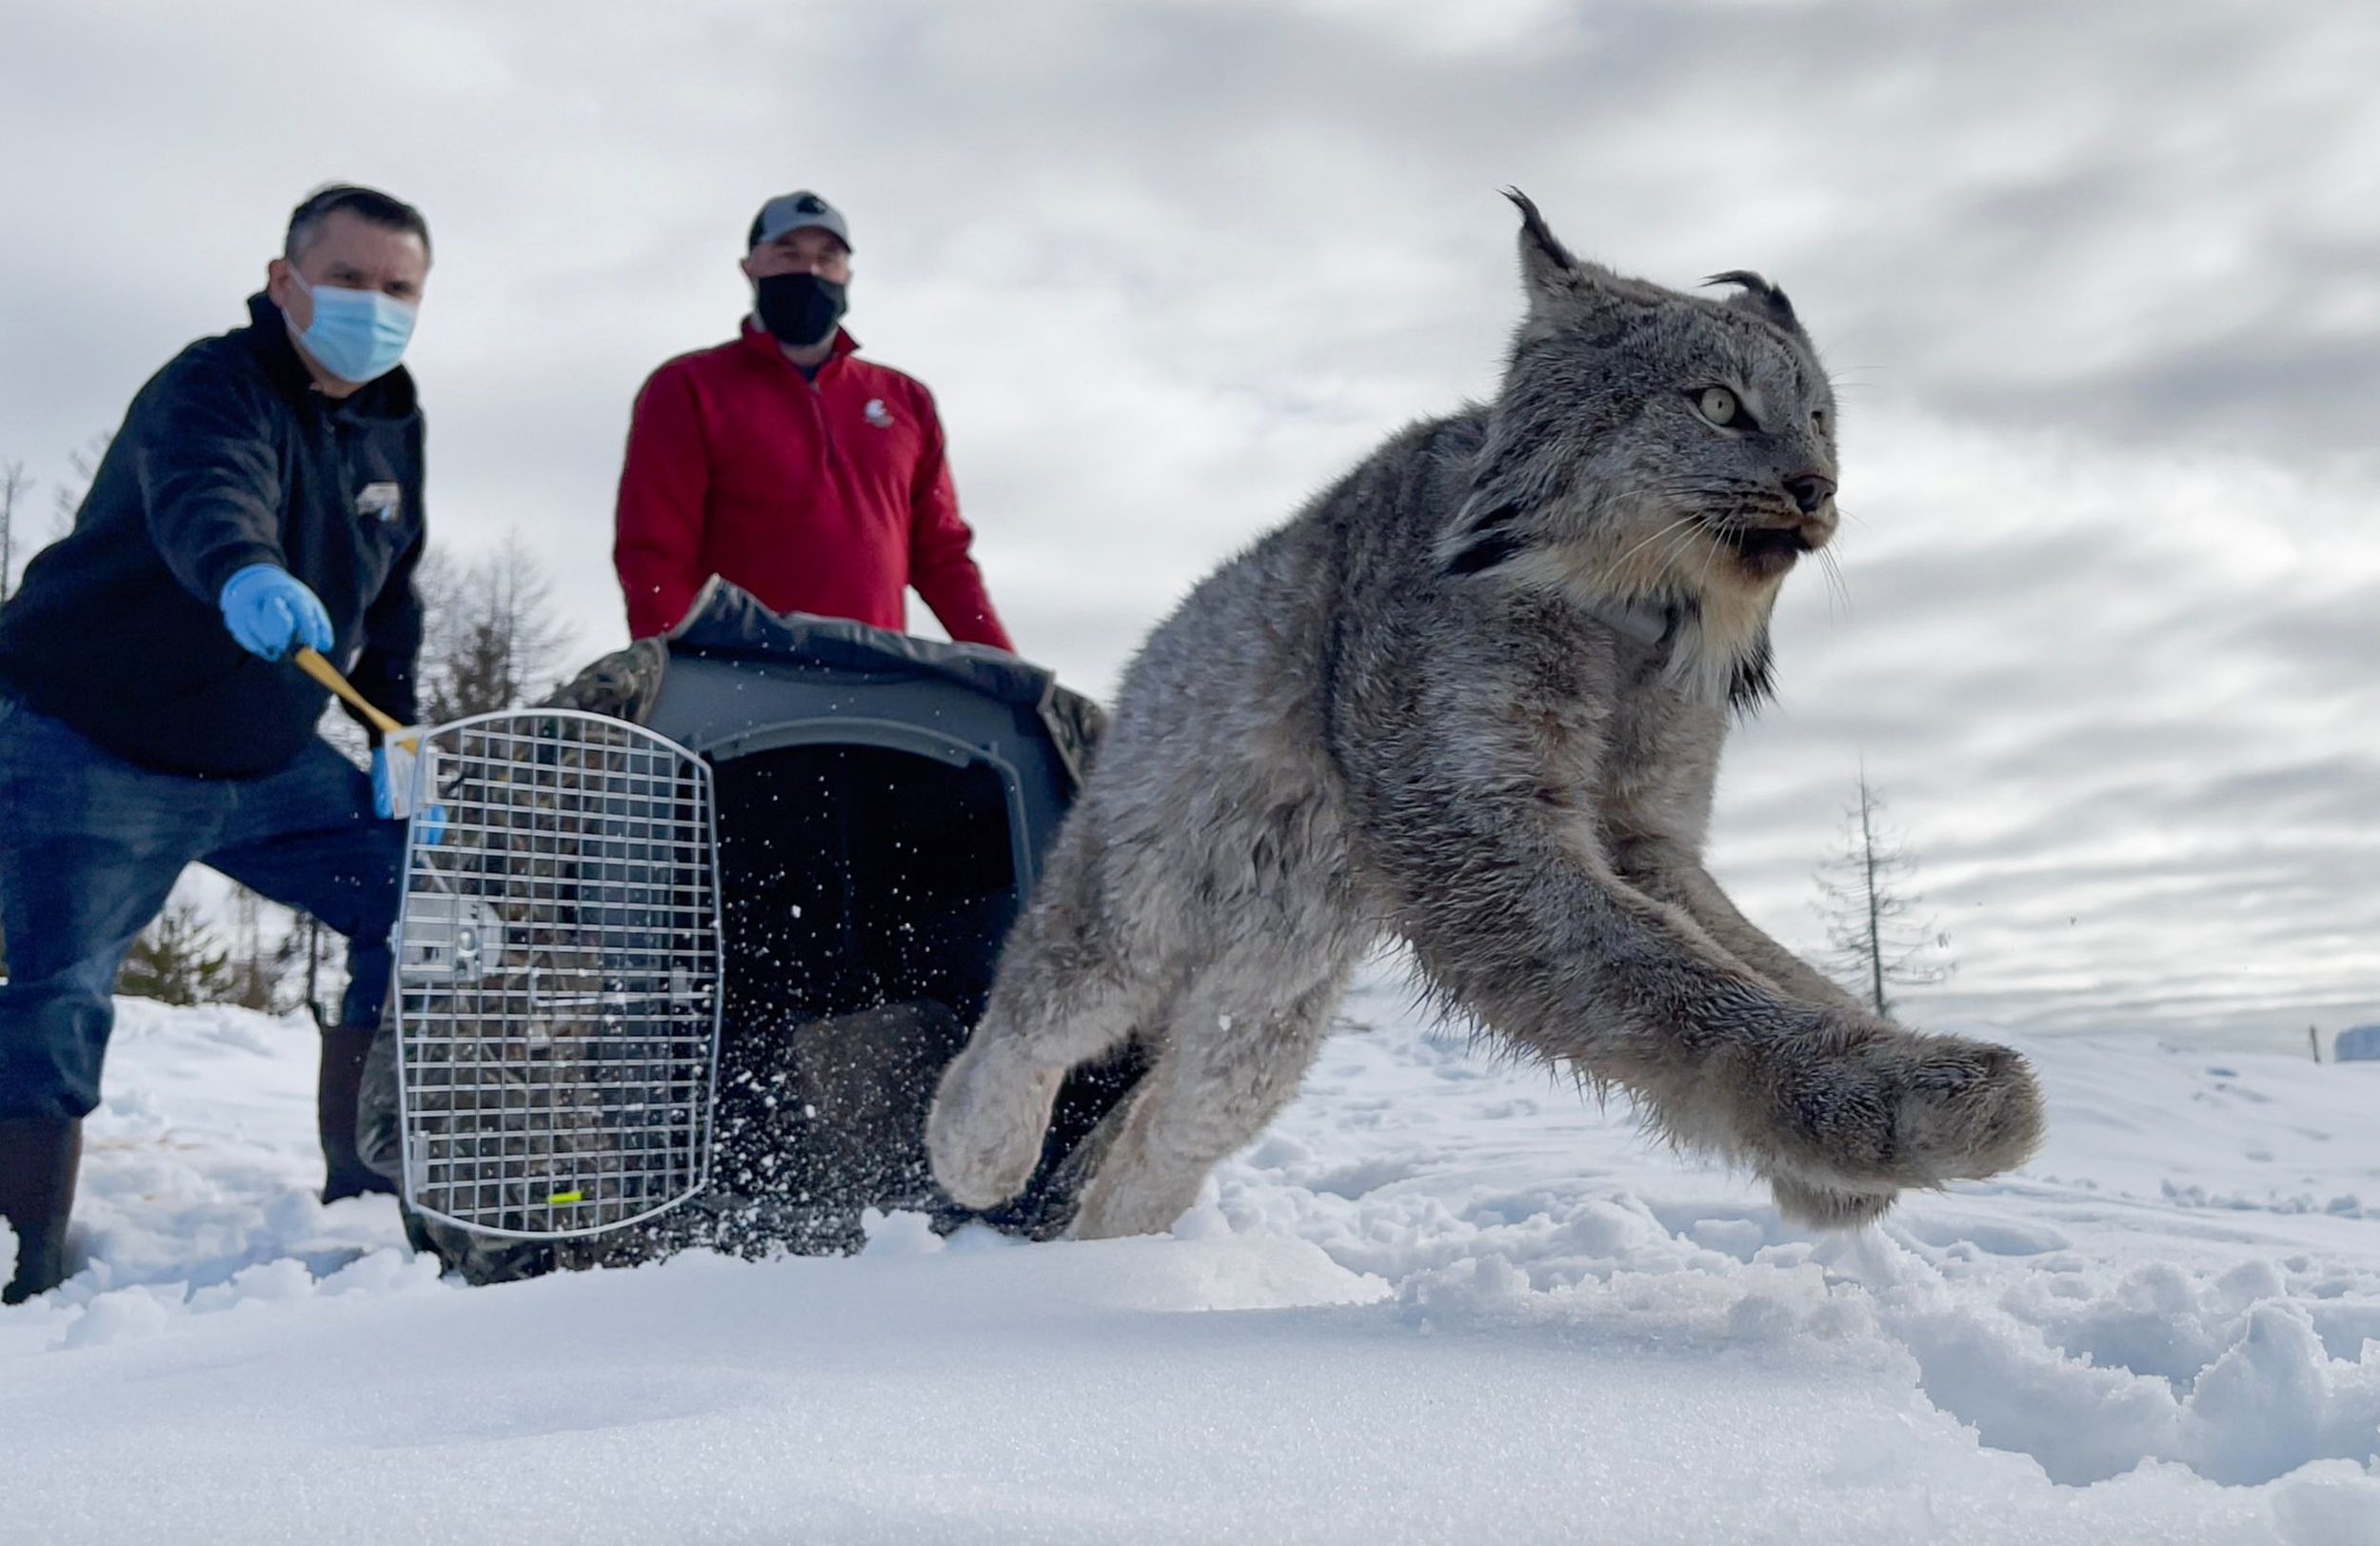 Elusive Black Canada Lynx Filmed in Wild for First Time Ever